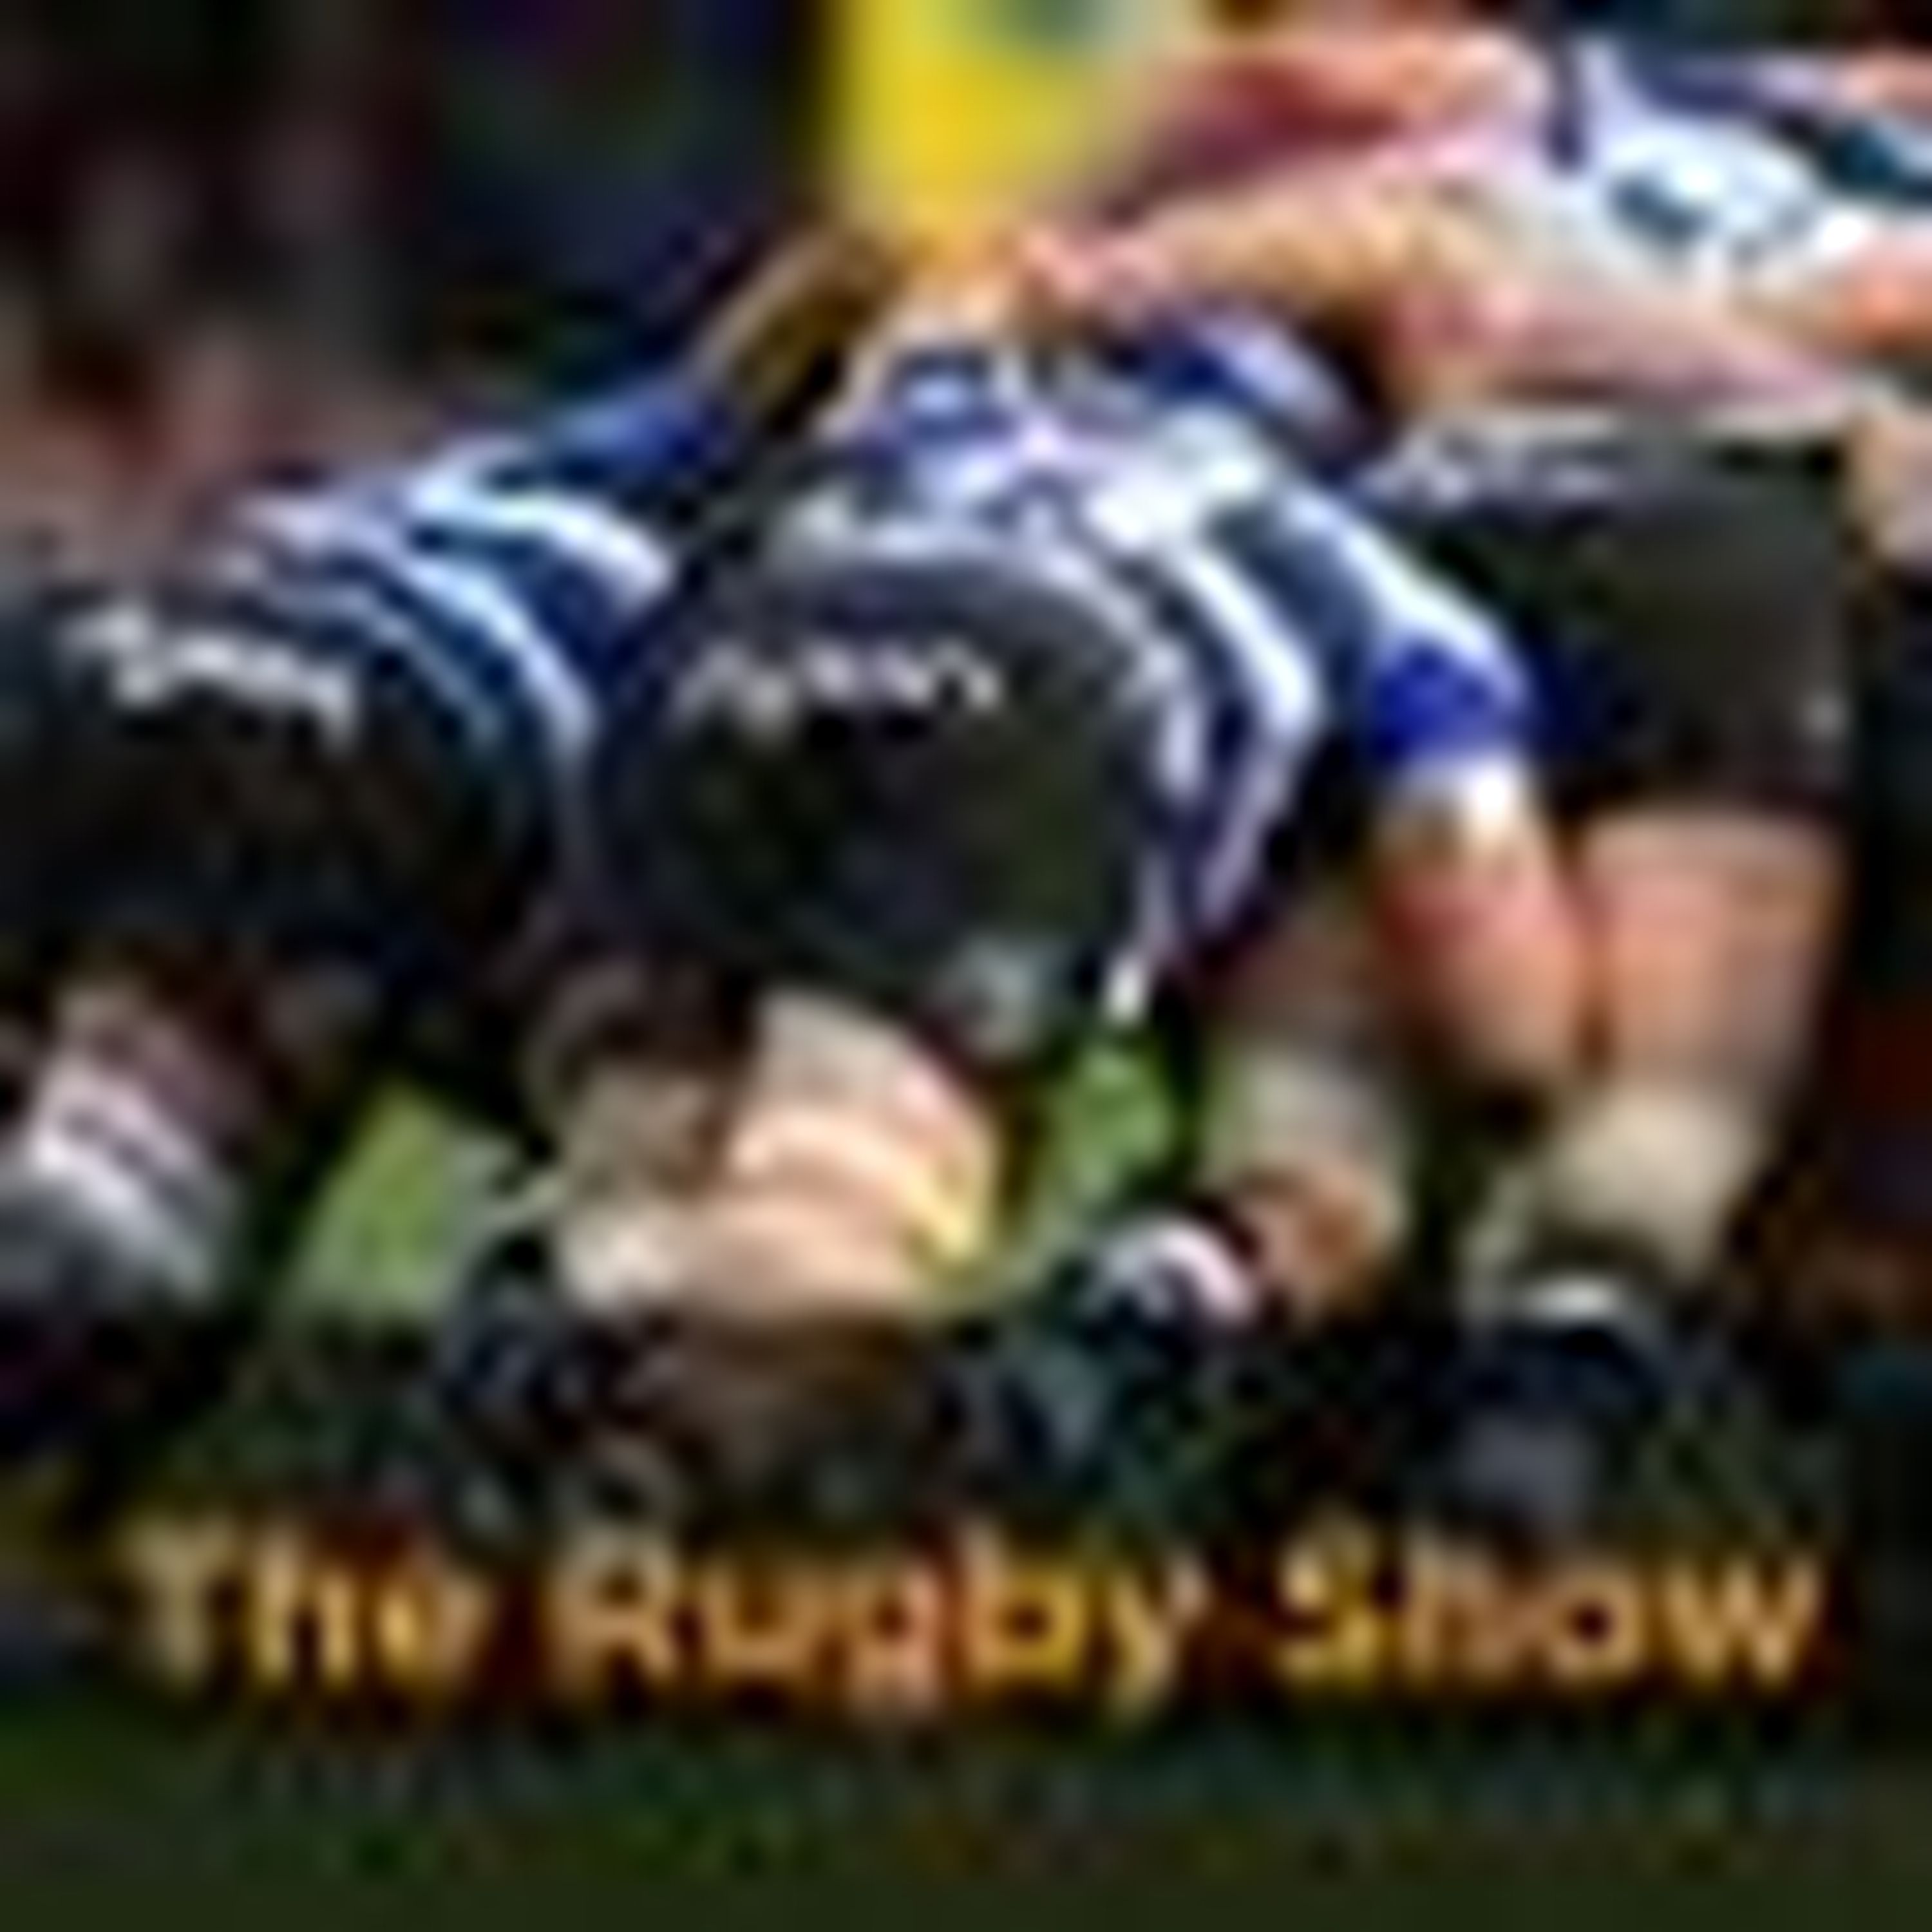 The Rugby Show on talkSPORT 2 podcast - Monday, May 7